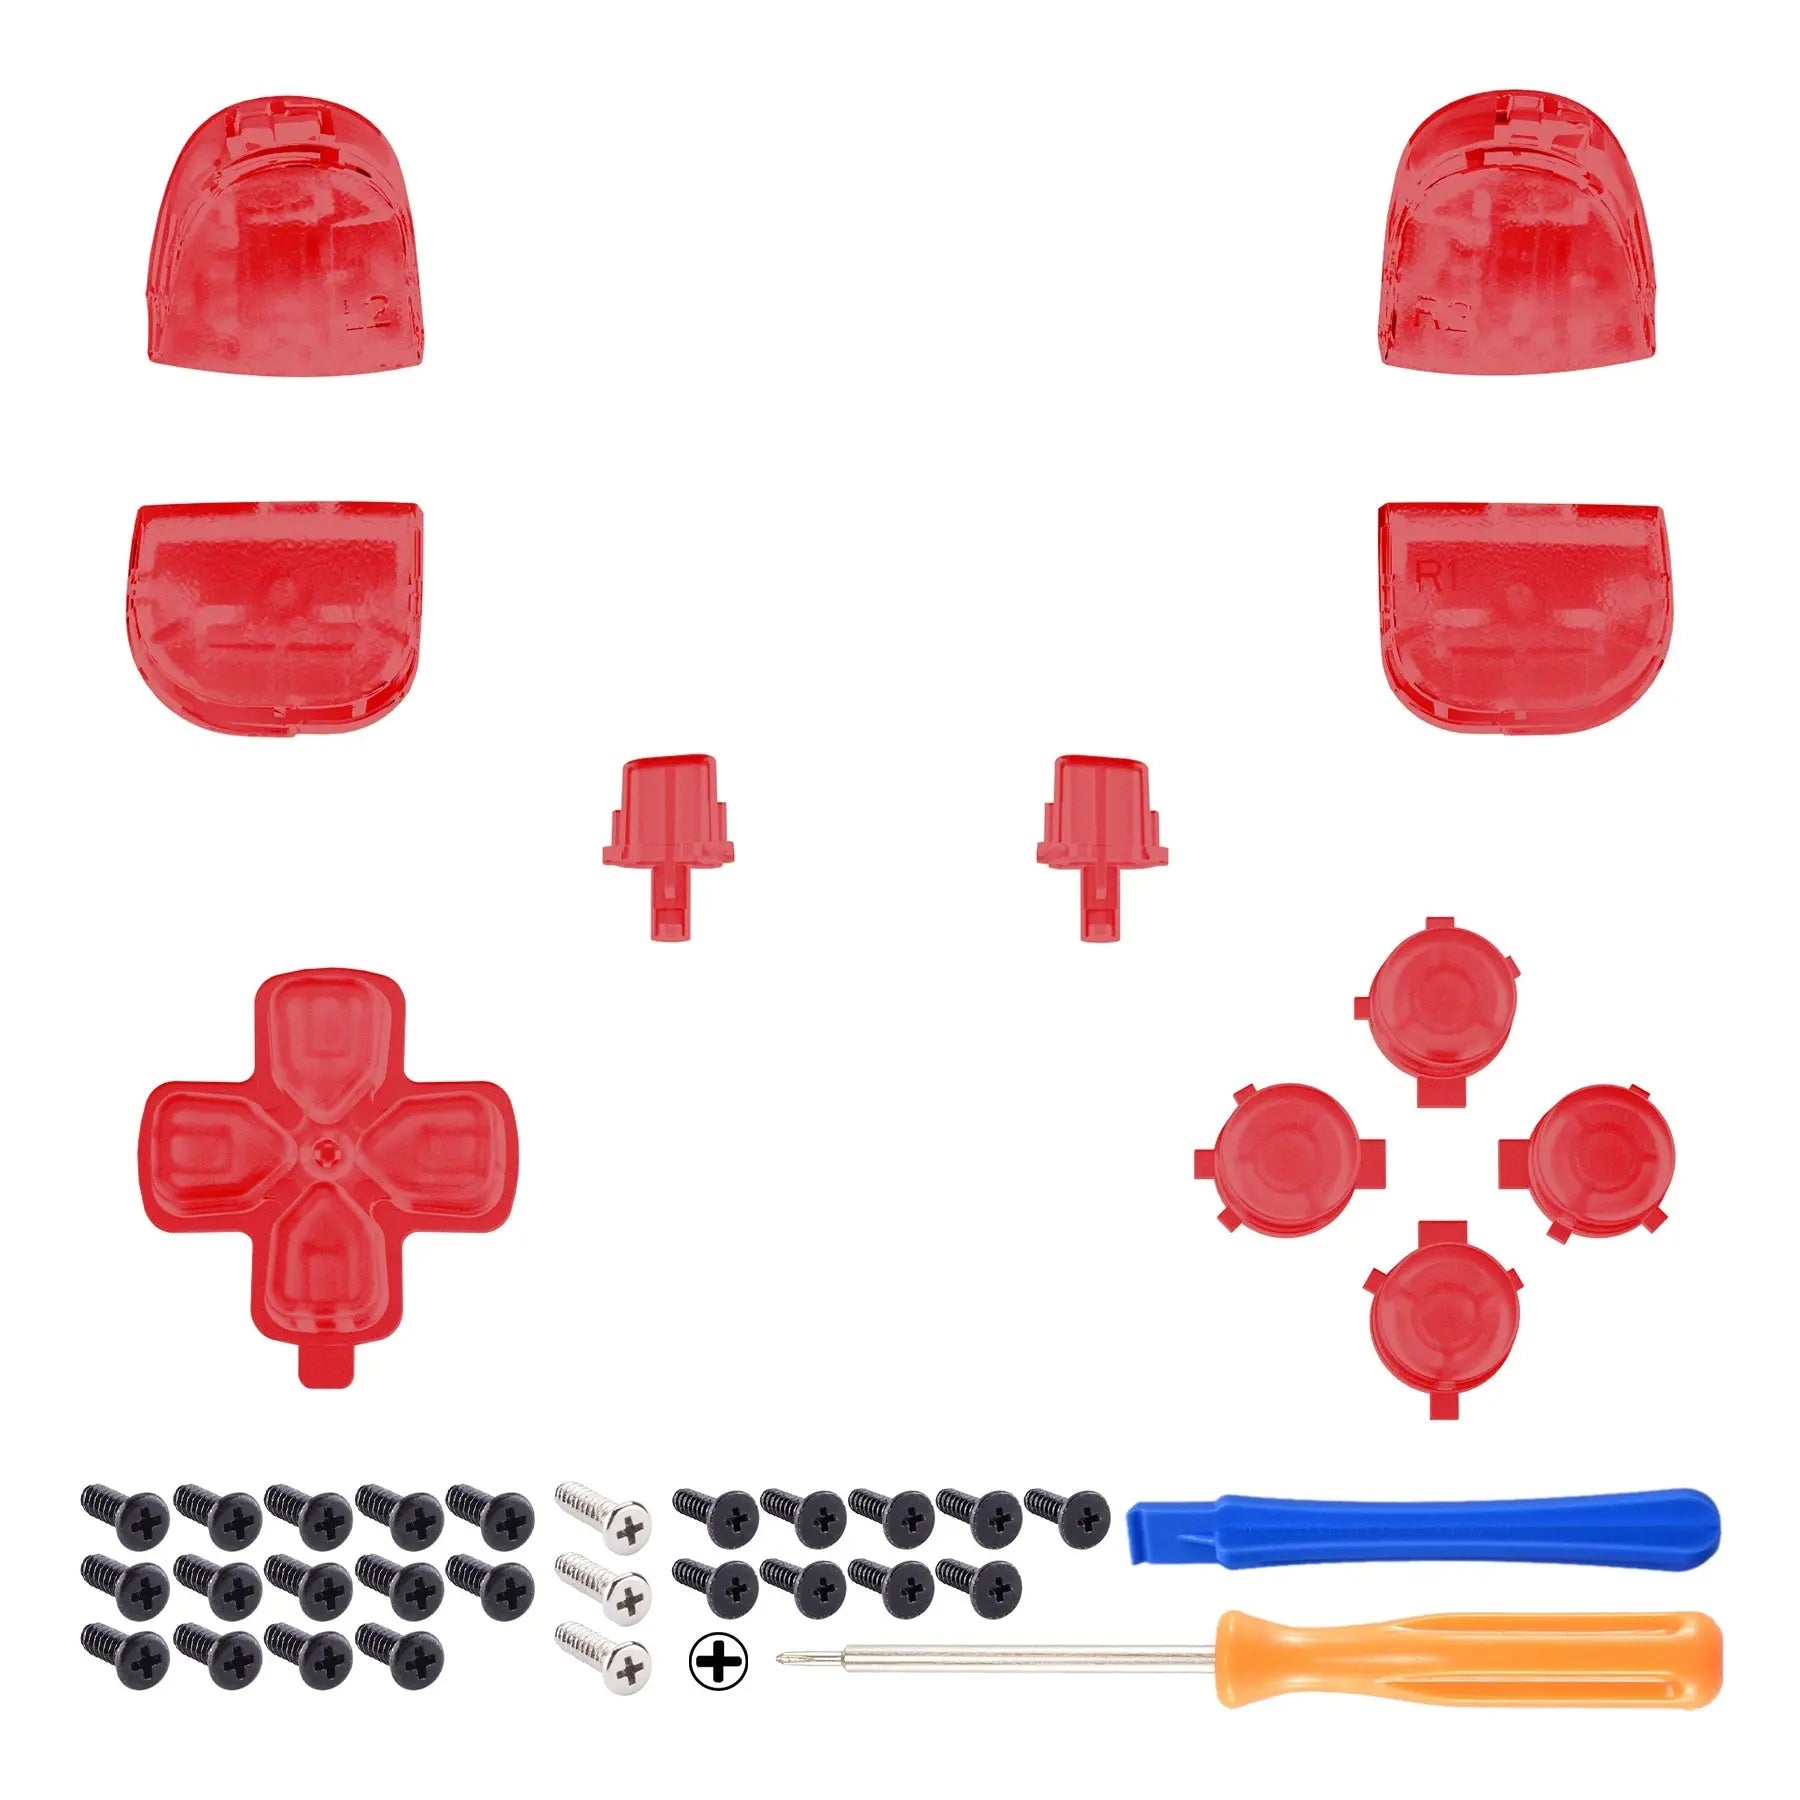 eXtremeRate Retail Replacement D-pad R1 L1 R2 L2 Triggers Share Options Face Buttons, Clear Red Full Set Buttons Compatible With ps5 Controller BDM-010 & BDM-020 - JPF3002G2